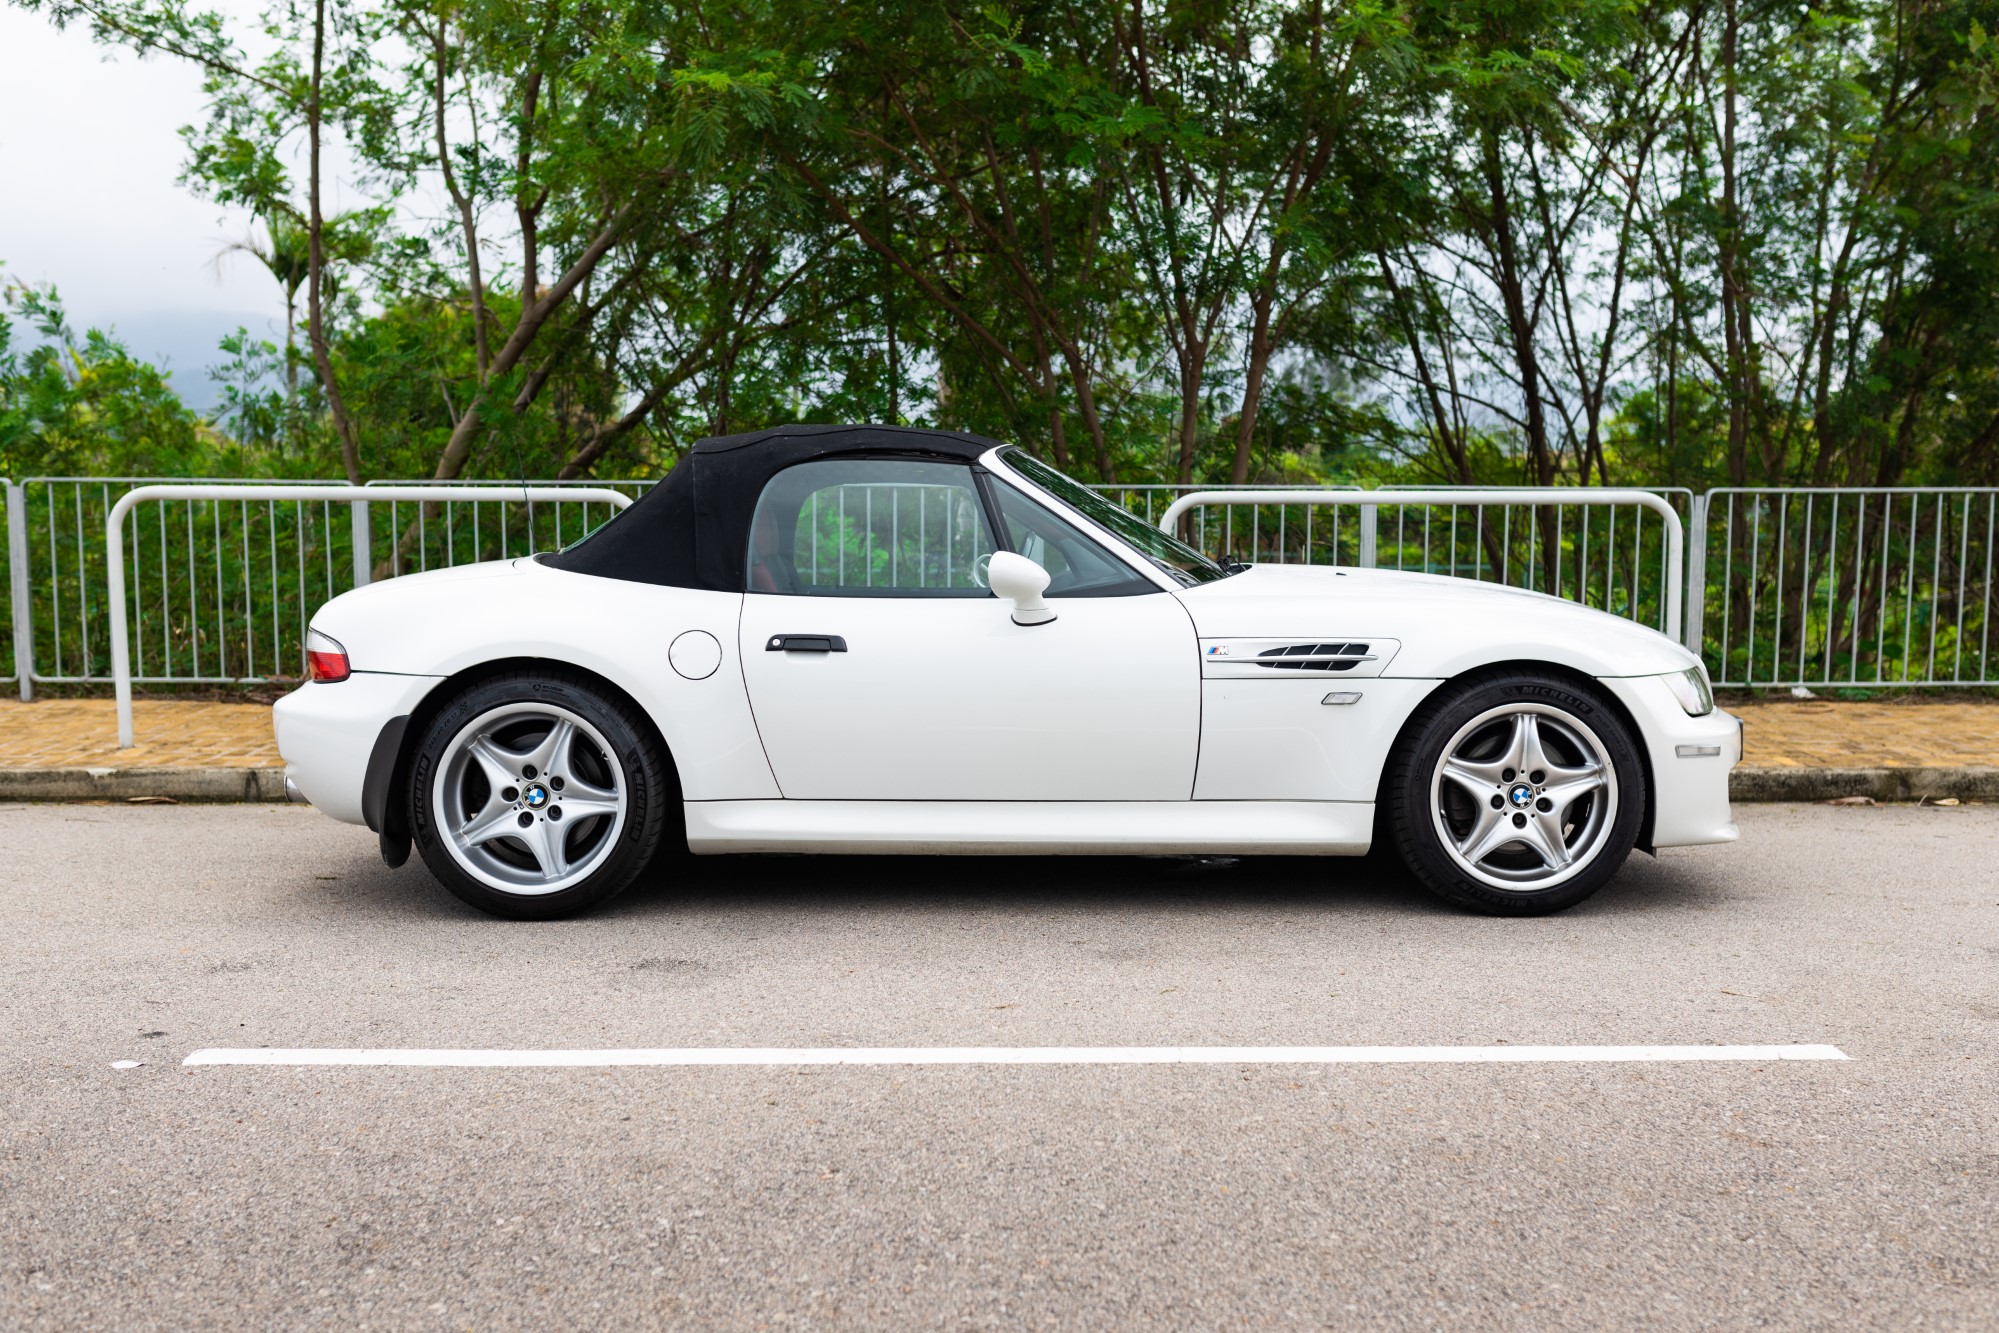 1998 BMW Z3 M ROADSTER for sale by auction in Yuen Long, Hong Kong